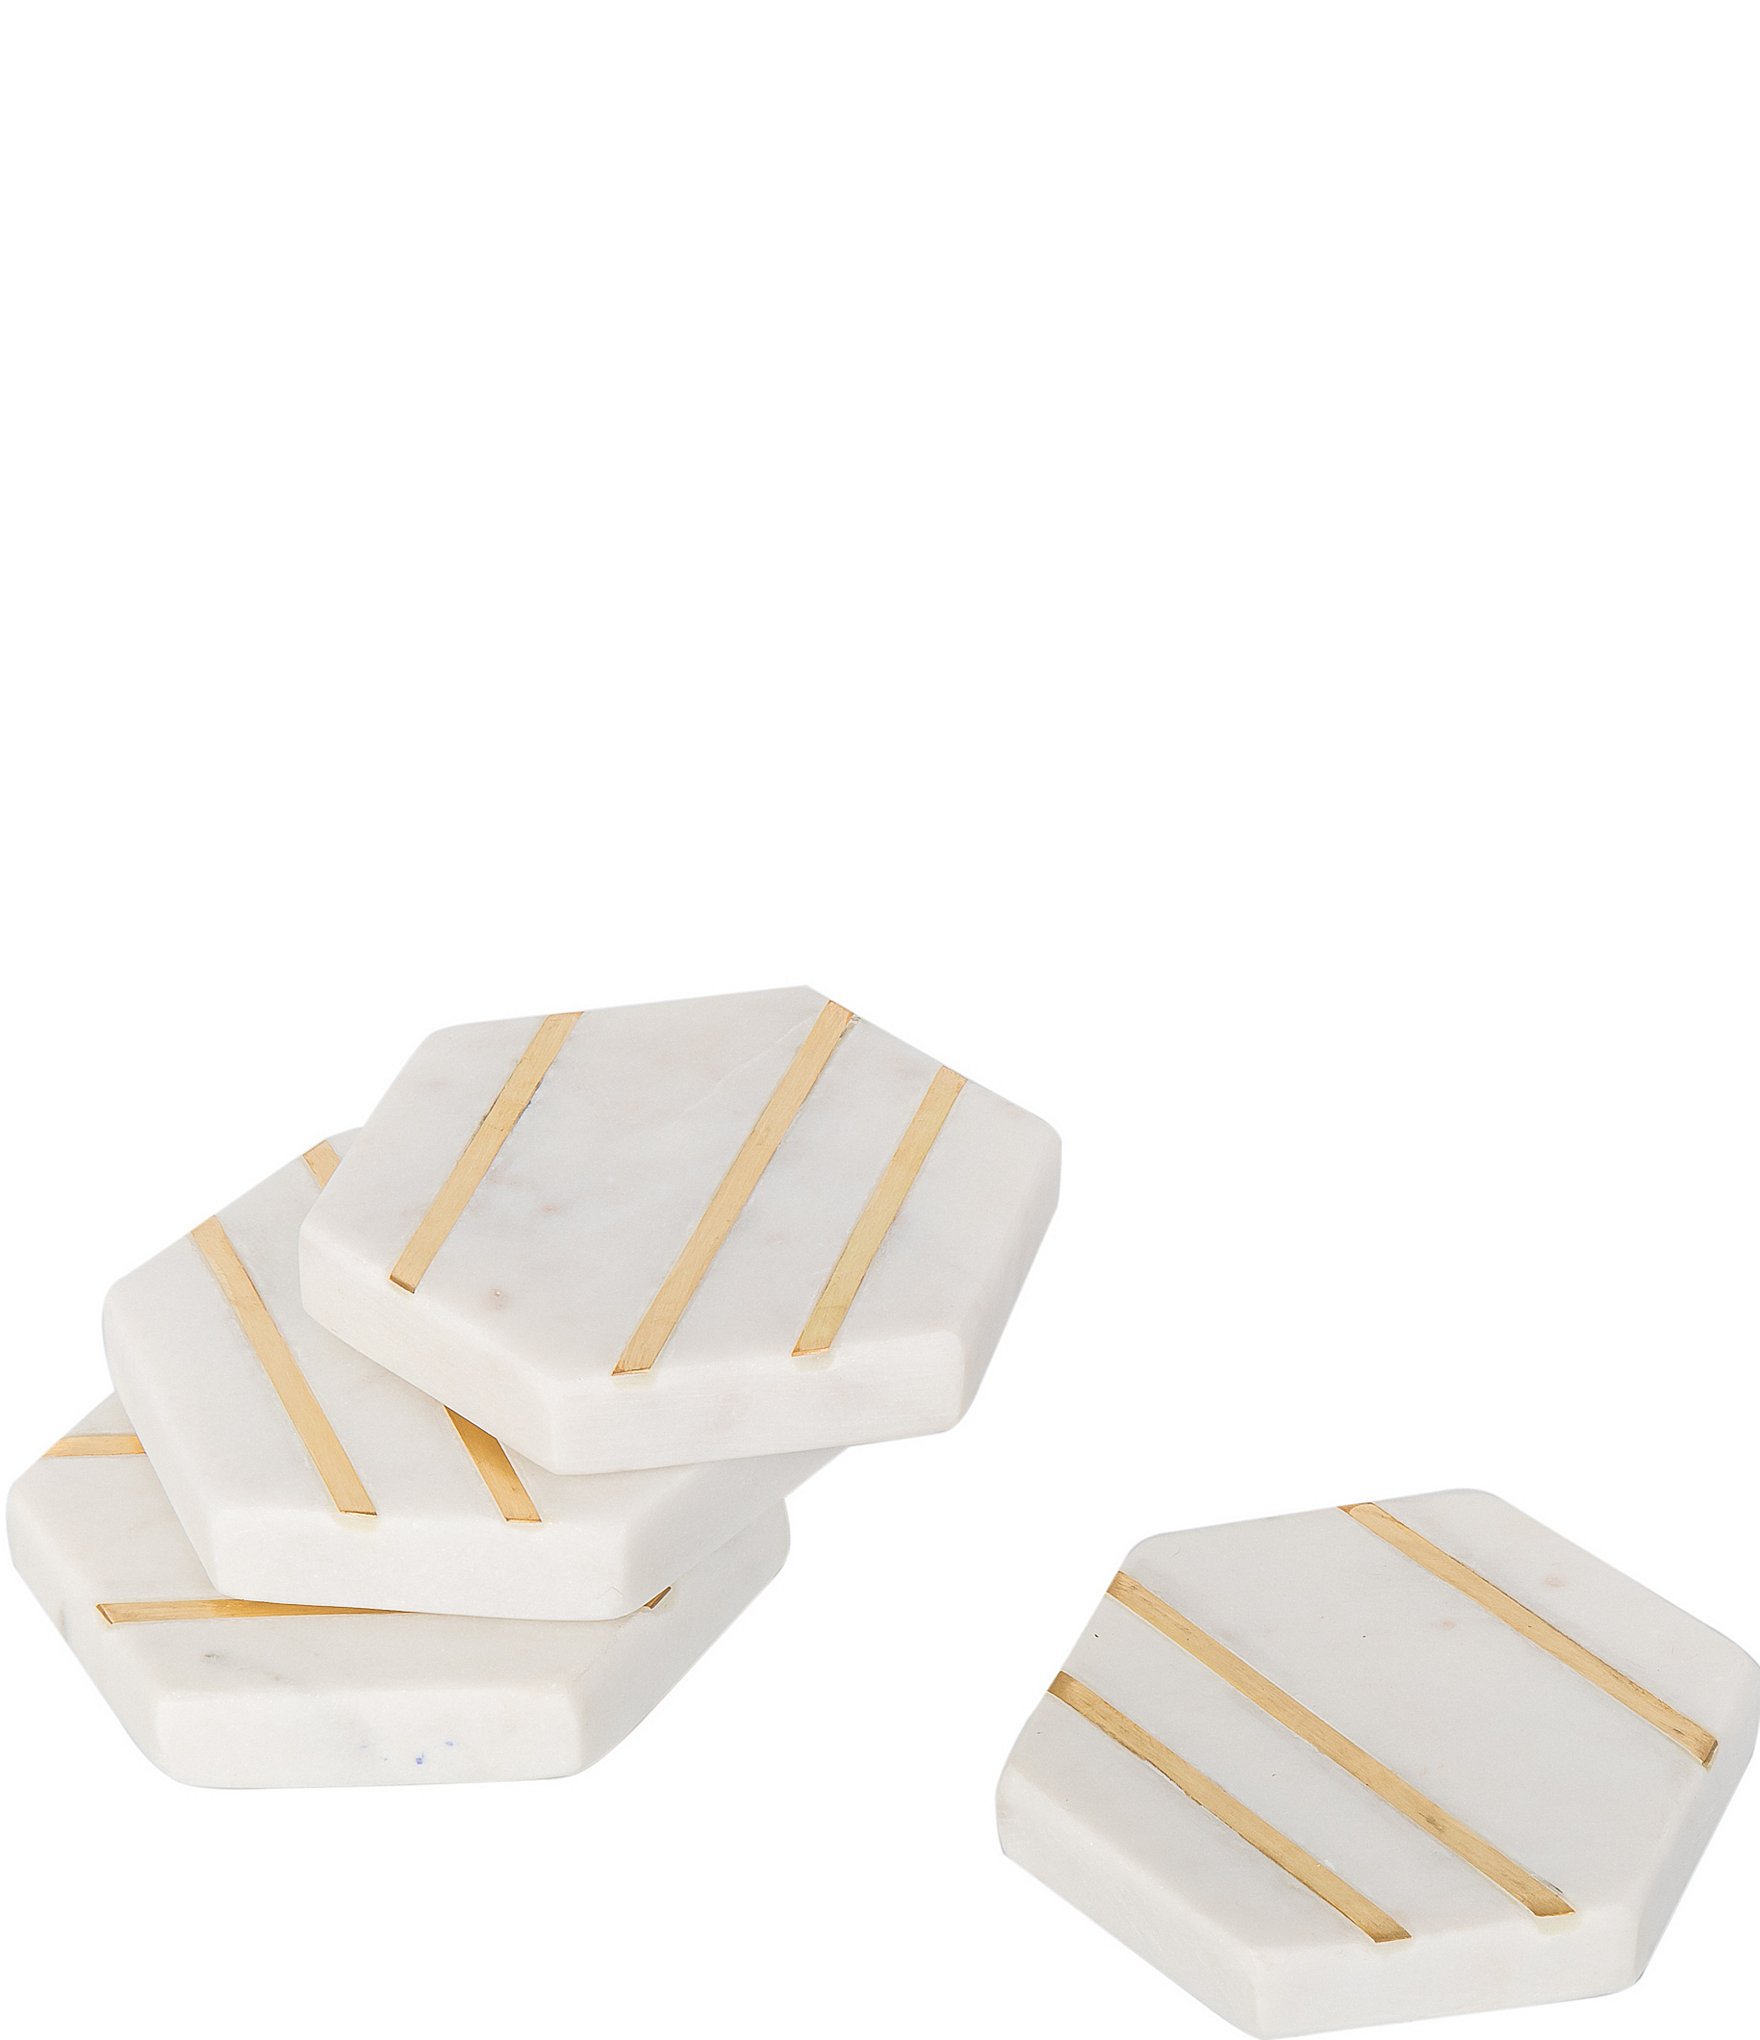 Set of 4 White Marble & Brass Inlay Coasters